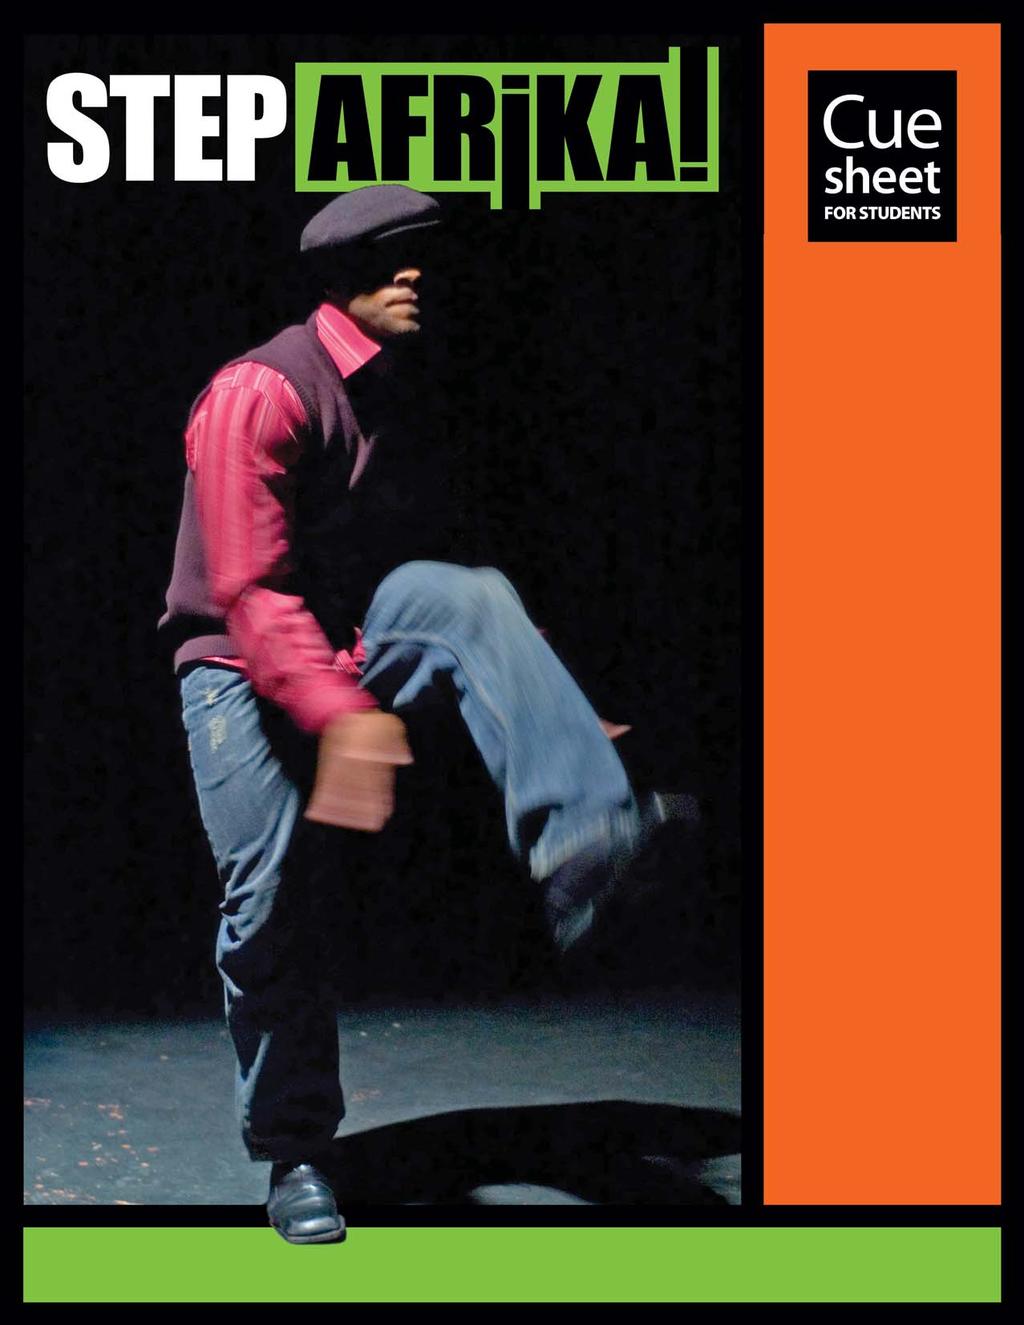 Welcome to Cuesheet, a performance guide published by the Education Department of the John F. Kennedy Center for the Performing Arts, Washington, D.C. This Cuesheet is designed to help you enjoy the dance performance by Step Afrika!